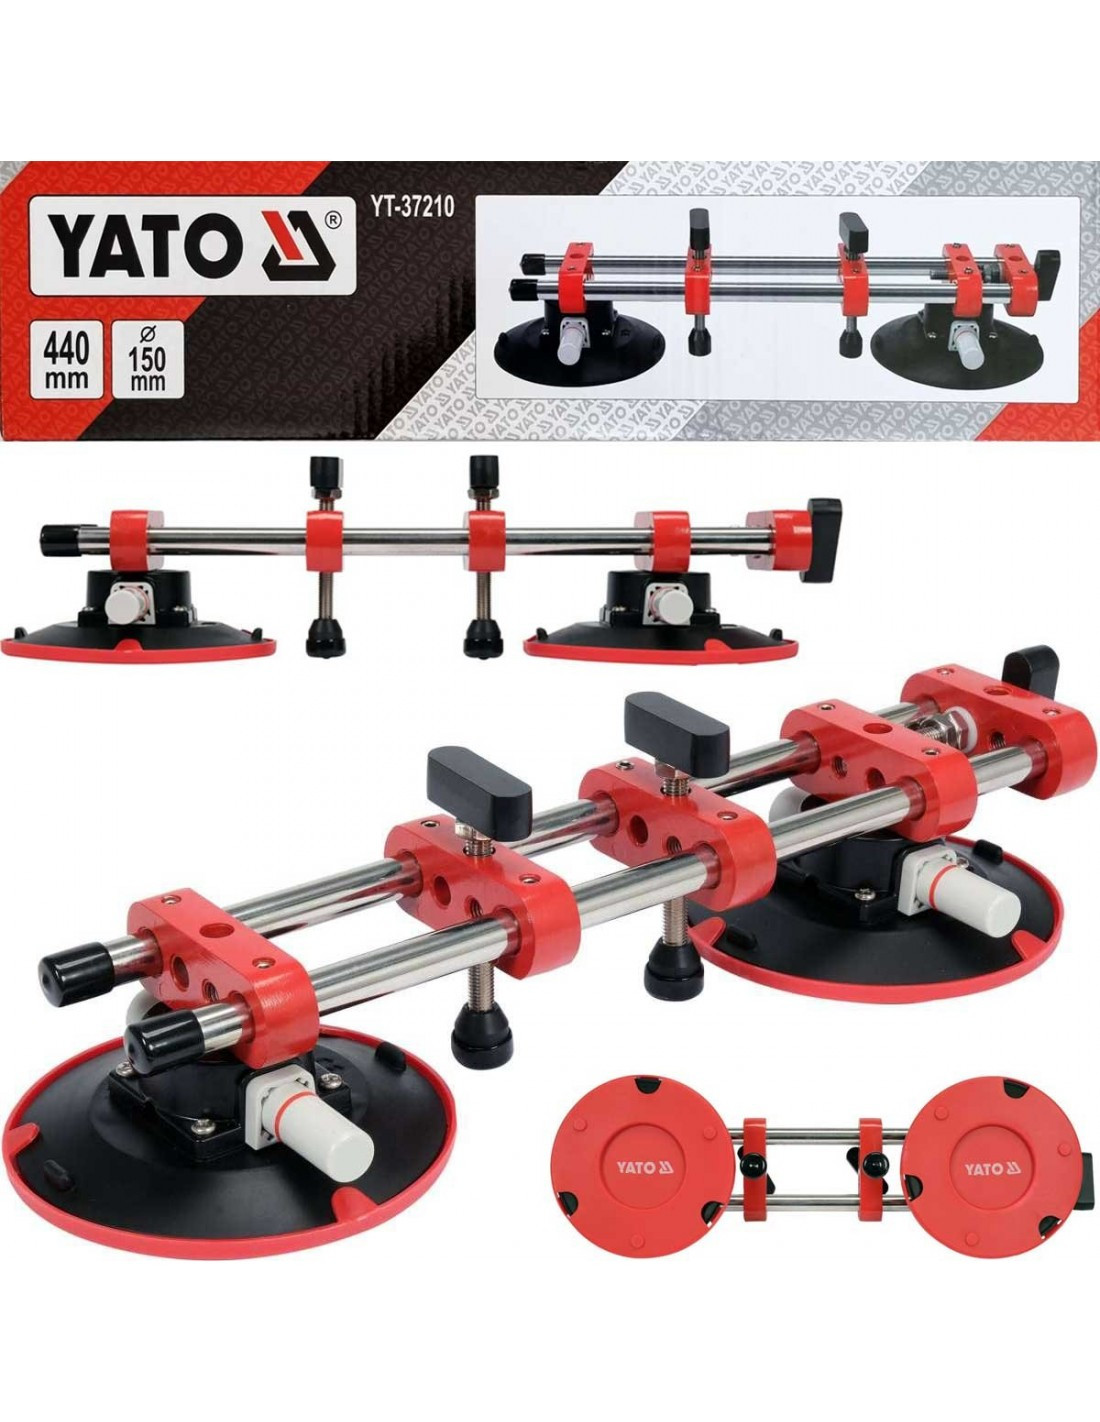 Adjustable Suction Cup YT-37210 YATO